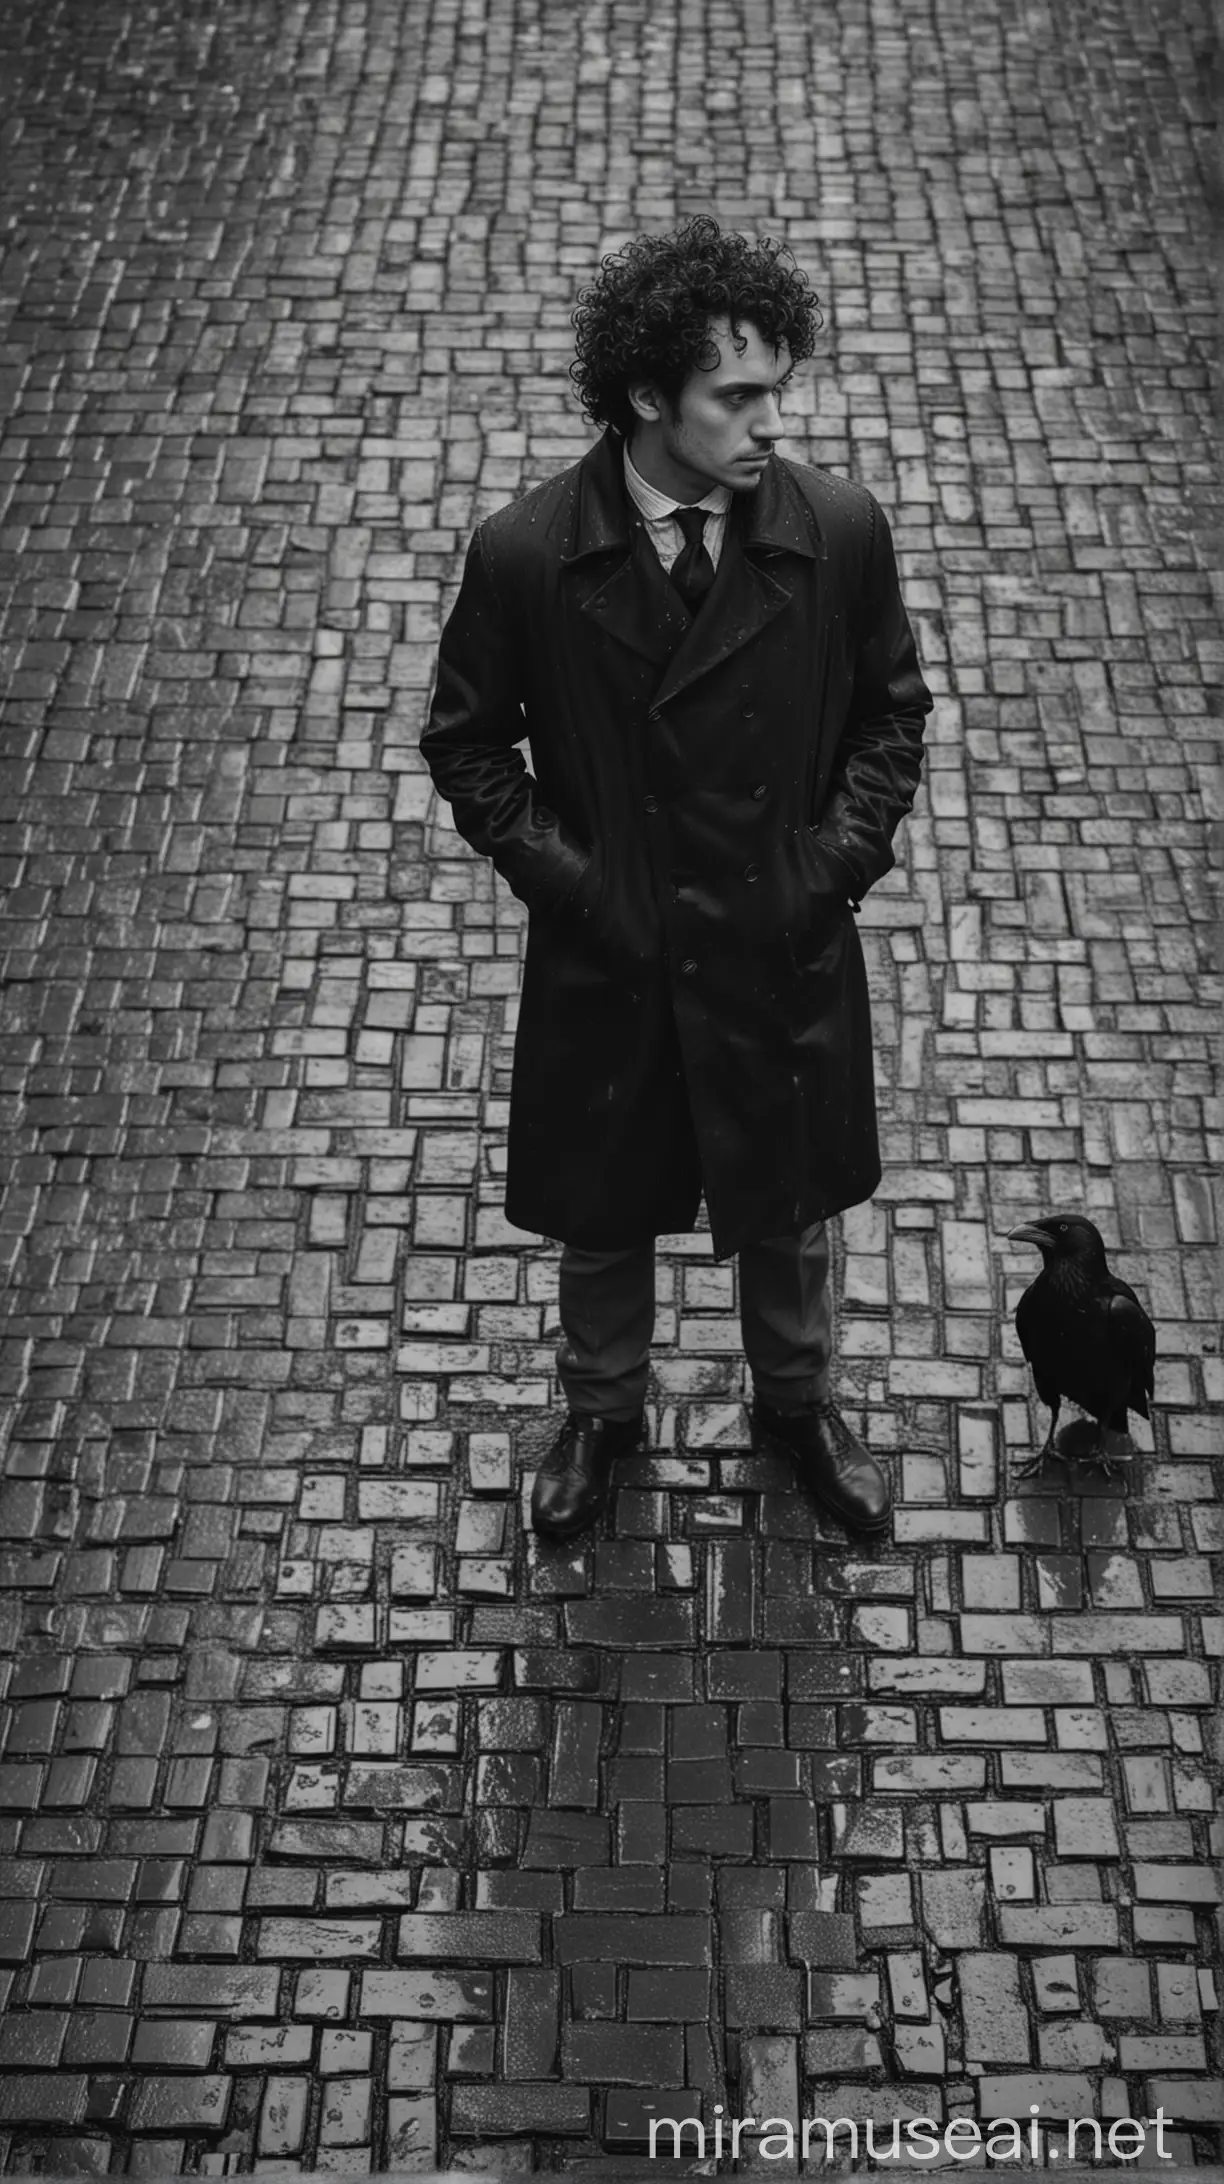 black and white photography of a man in a black coat with curly hair and a black raven sitting on the floor in the rain starring at each other in a grey backyard of a 19th century factory build of bricks.